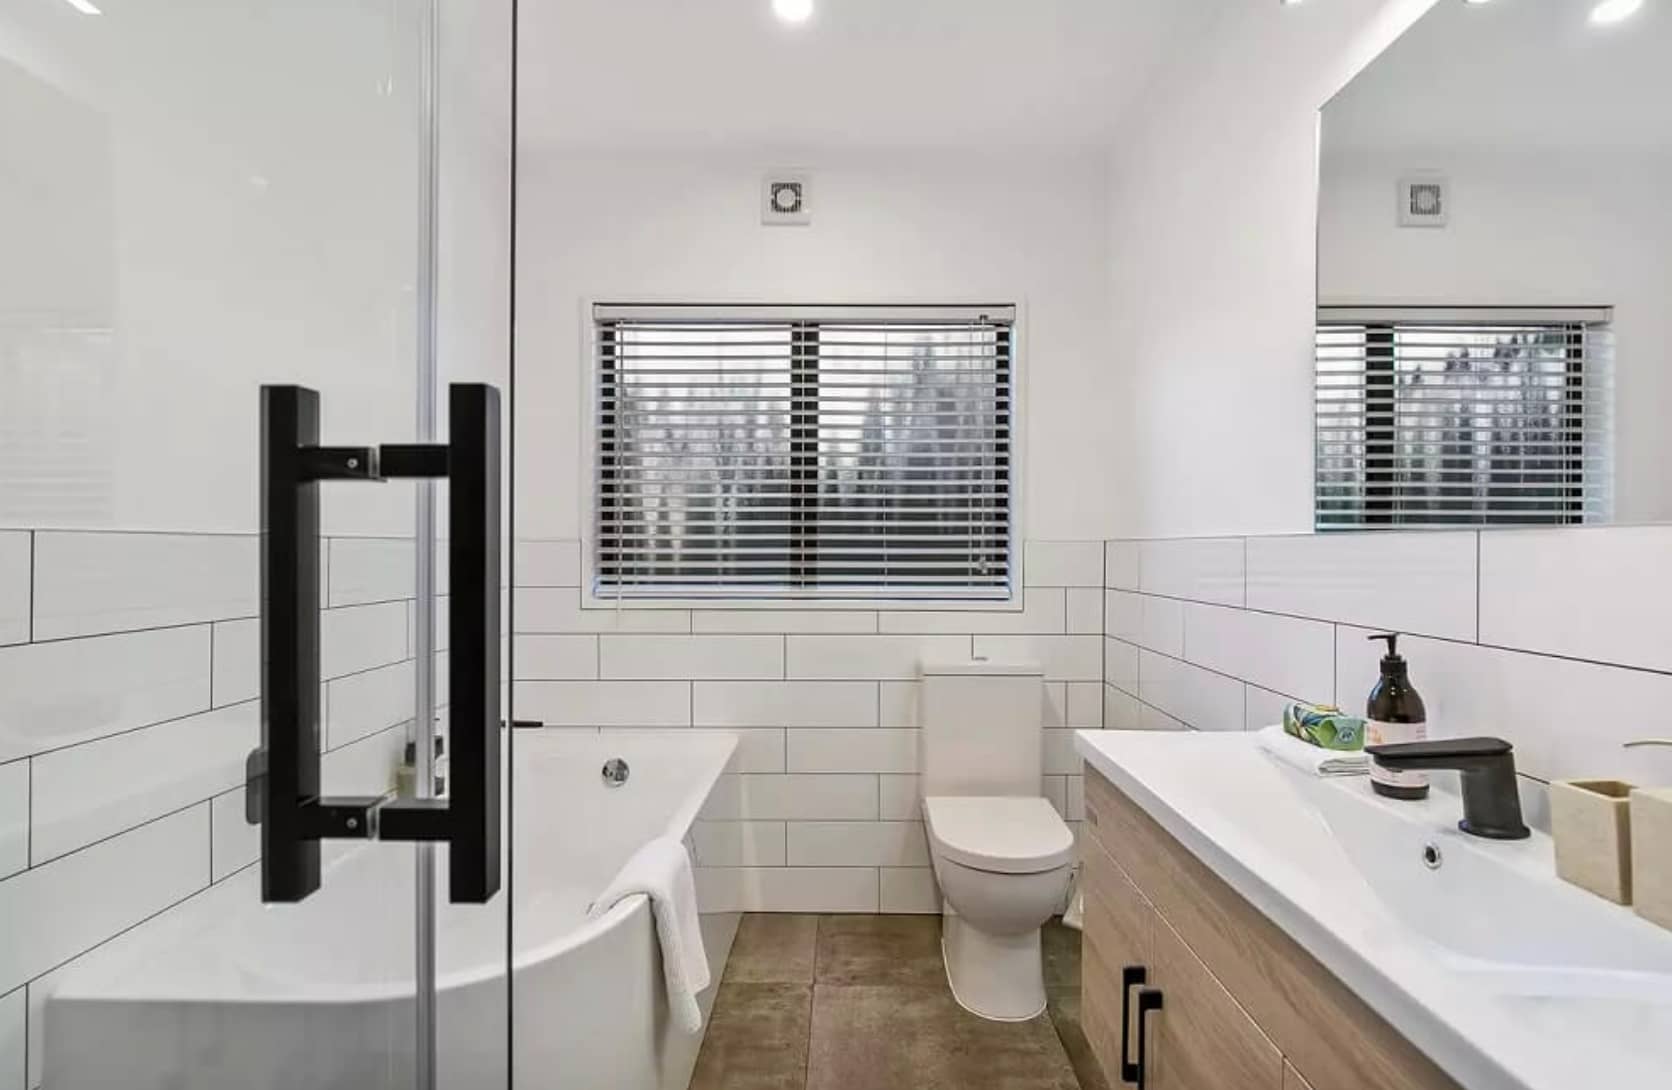 ensuite that has been renovated in brisbane